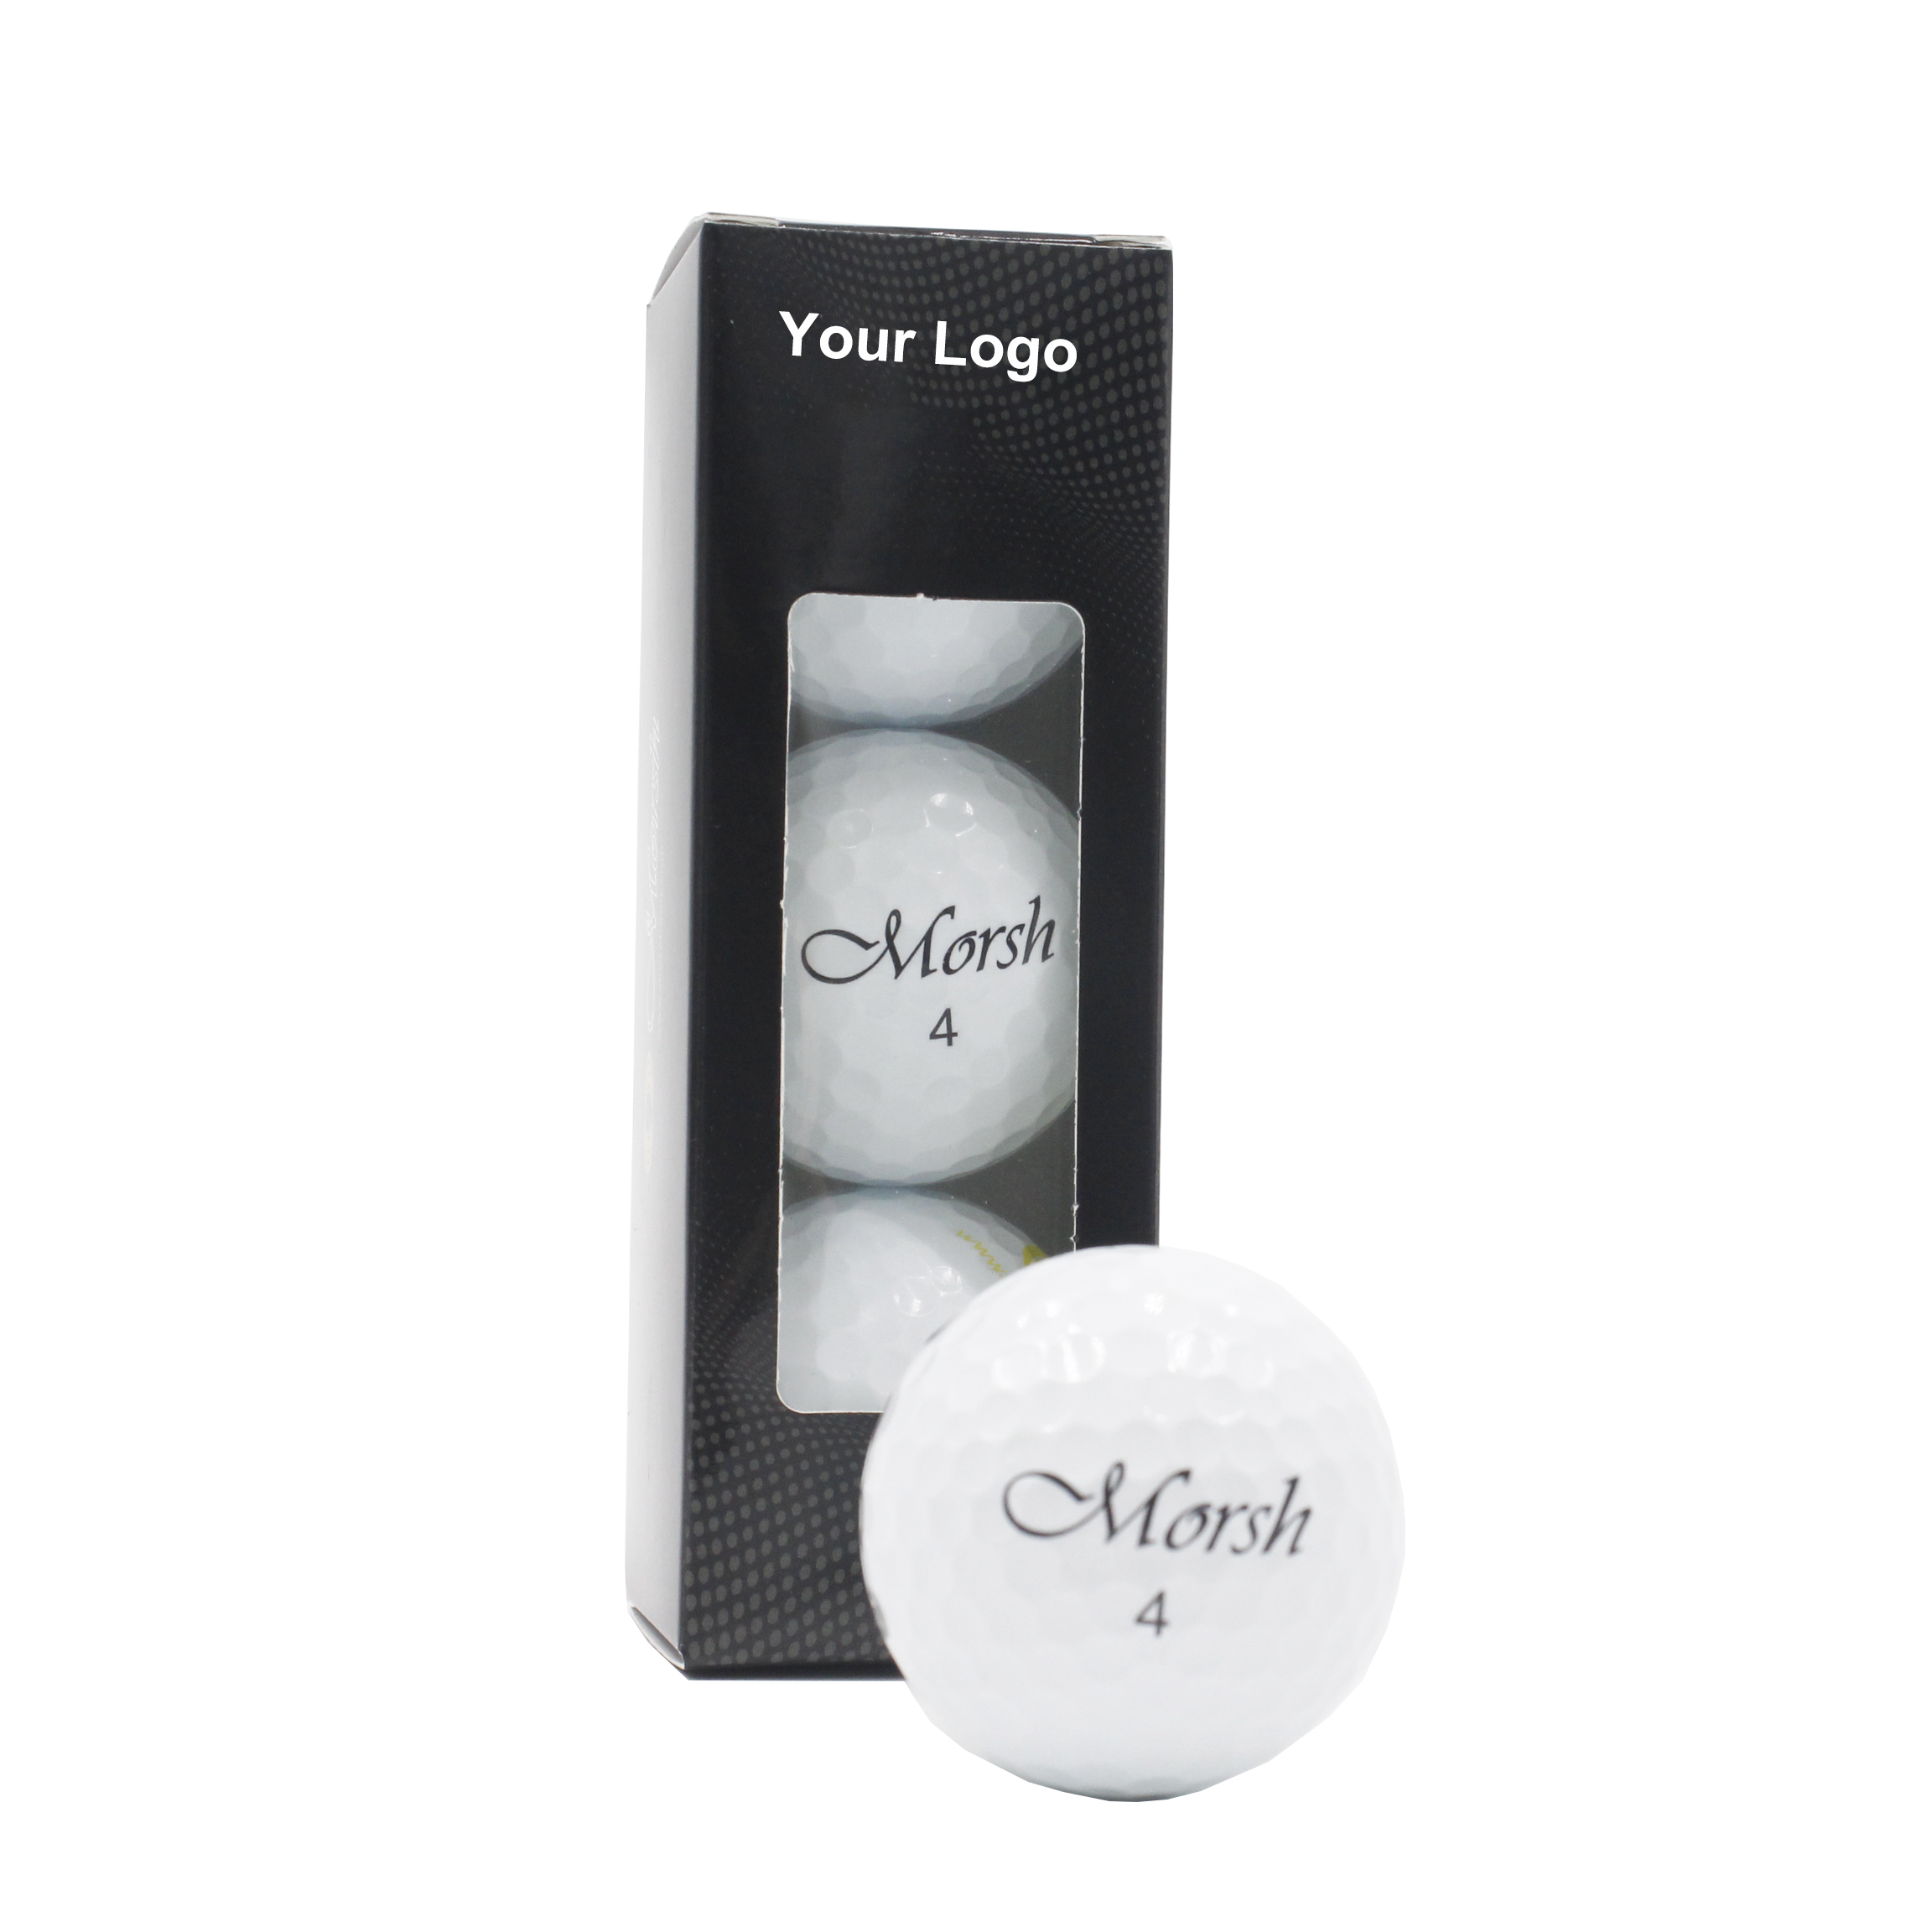 Factory Price High Quality Personalized Golf Balls - Logo Golf Balls - Custom Golf Balls With Box And Sleeves Surlyn or Urethane Cover